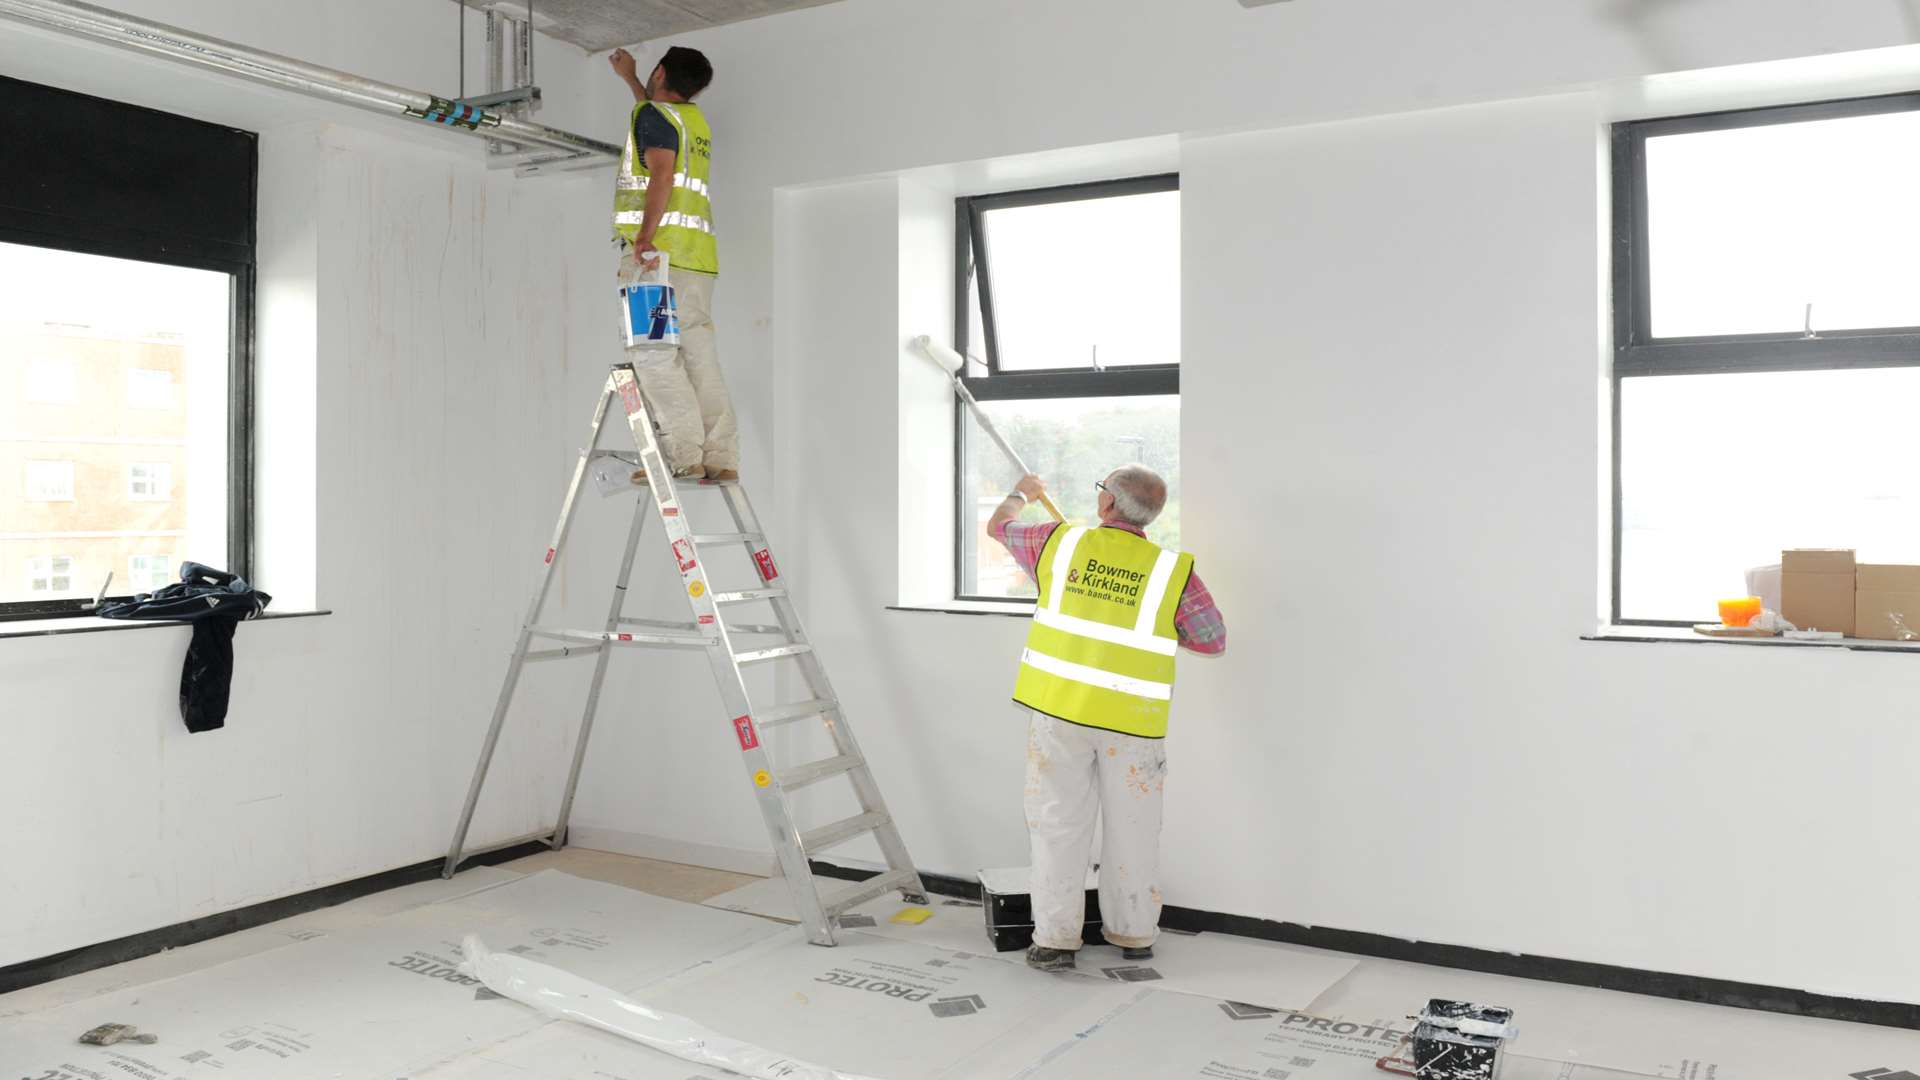 Final touches are being made to classrooms